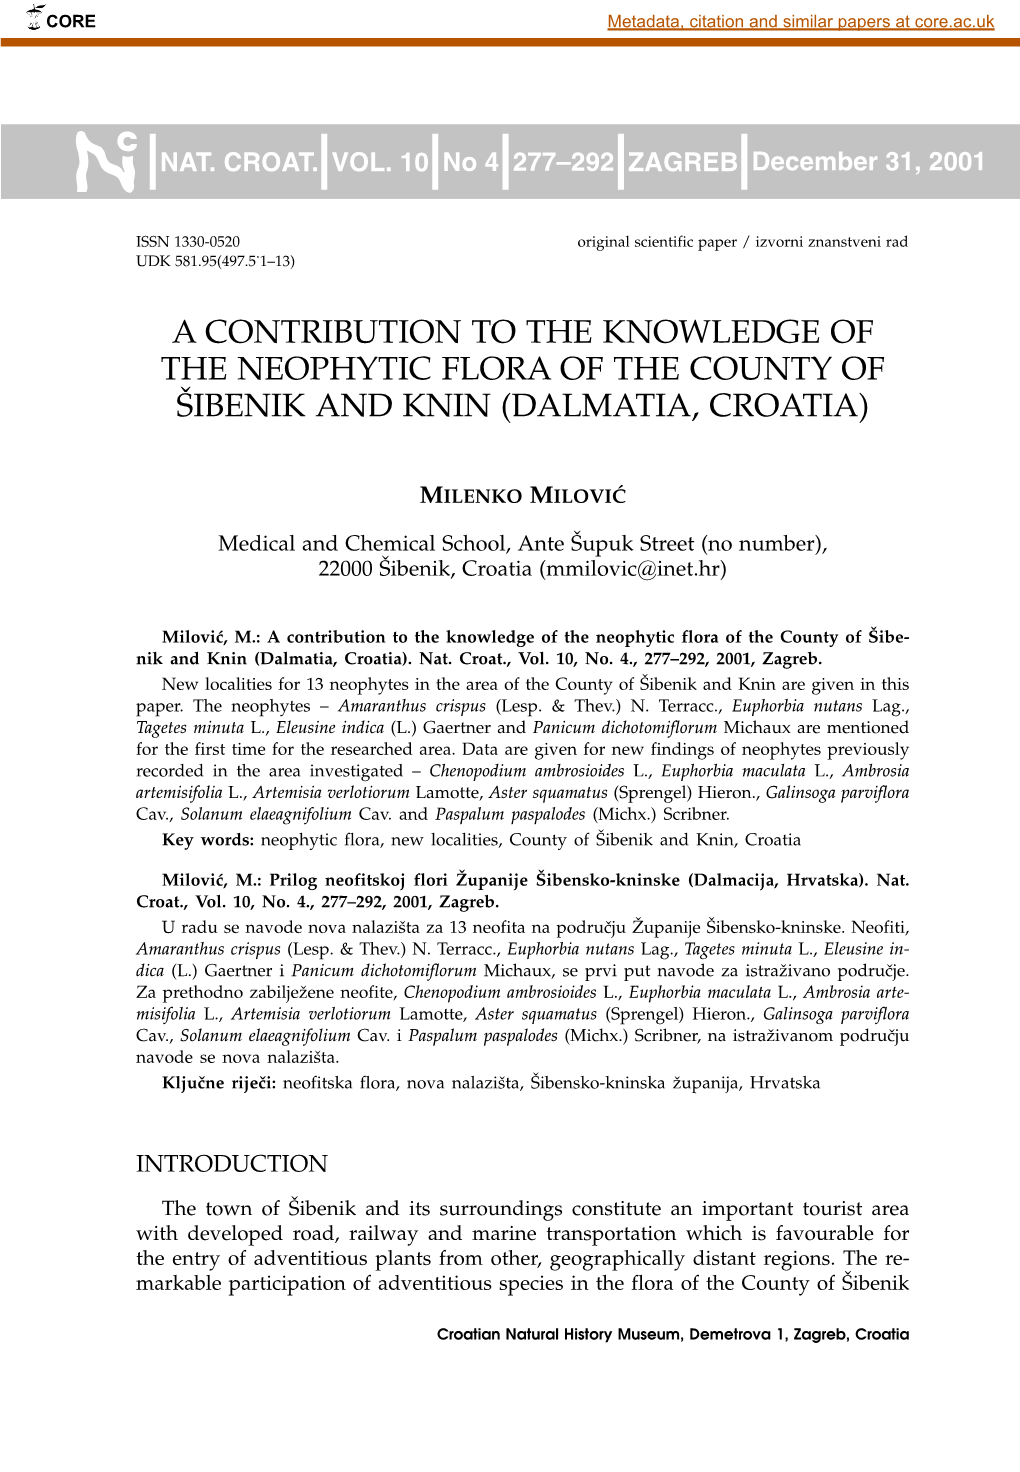 A Contribution to the Knowledge of the Neophytic Flora of the County of [Ibenik and Knin (Dalmatia, Croatia)